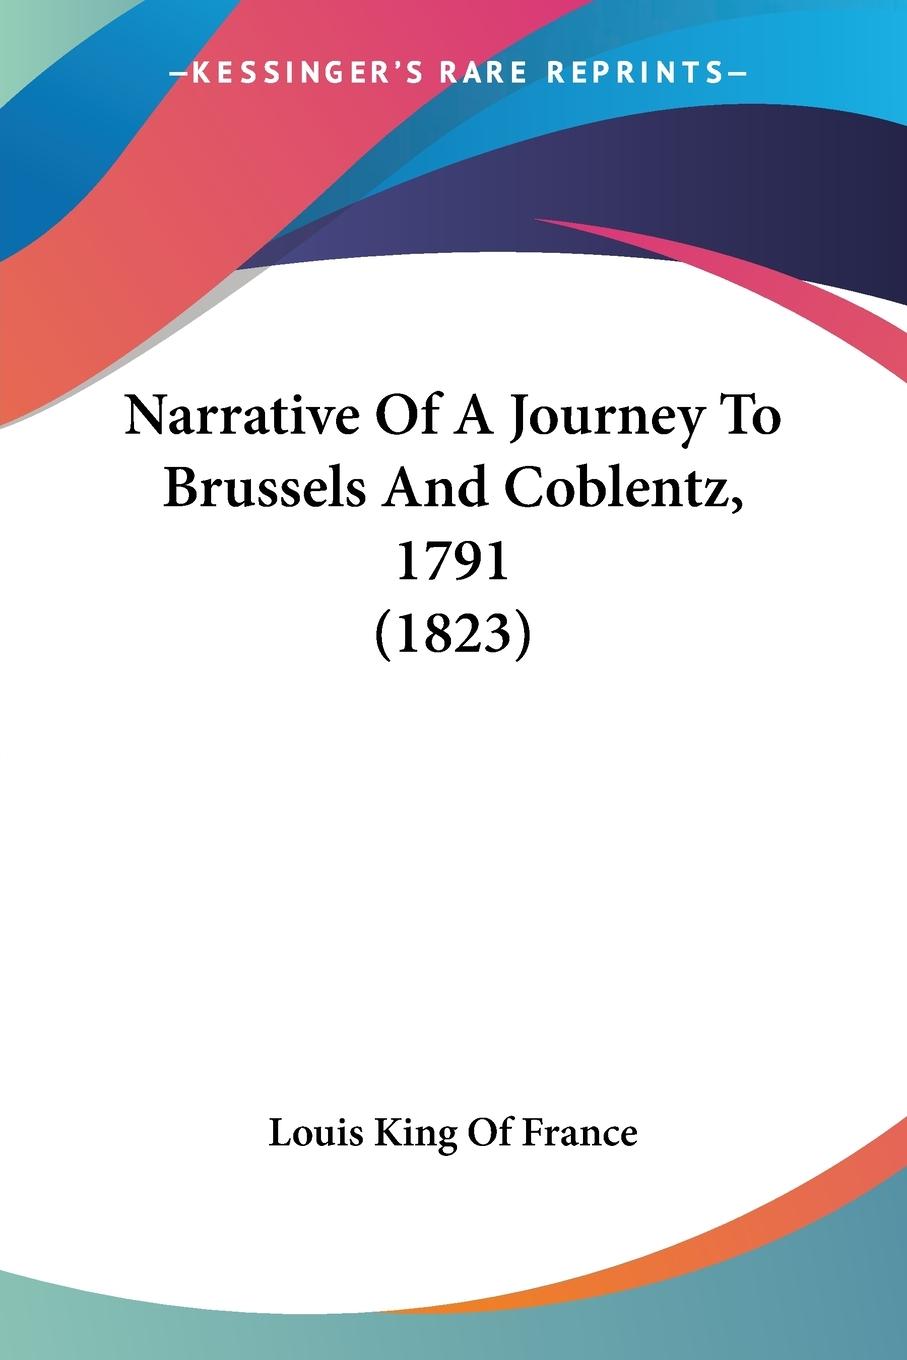 Narrative Of A Journey To Brussels And Coblentz, 1791 (1823) - Louis King Of France